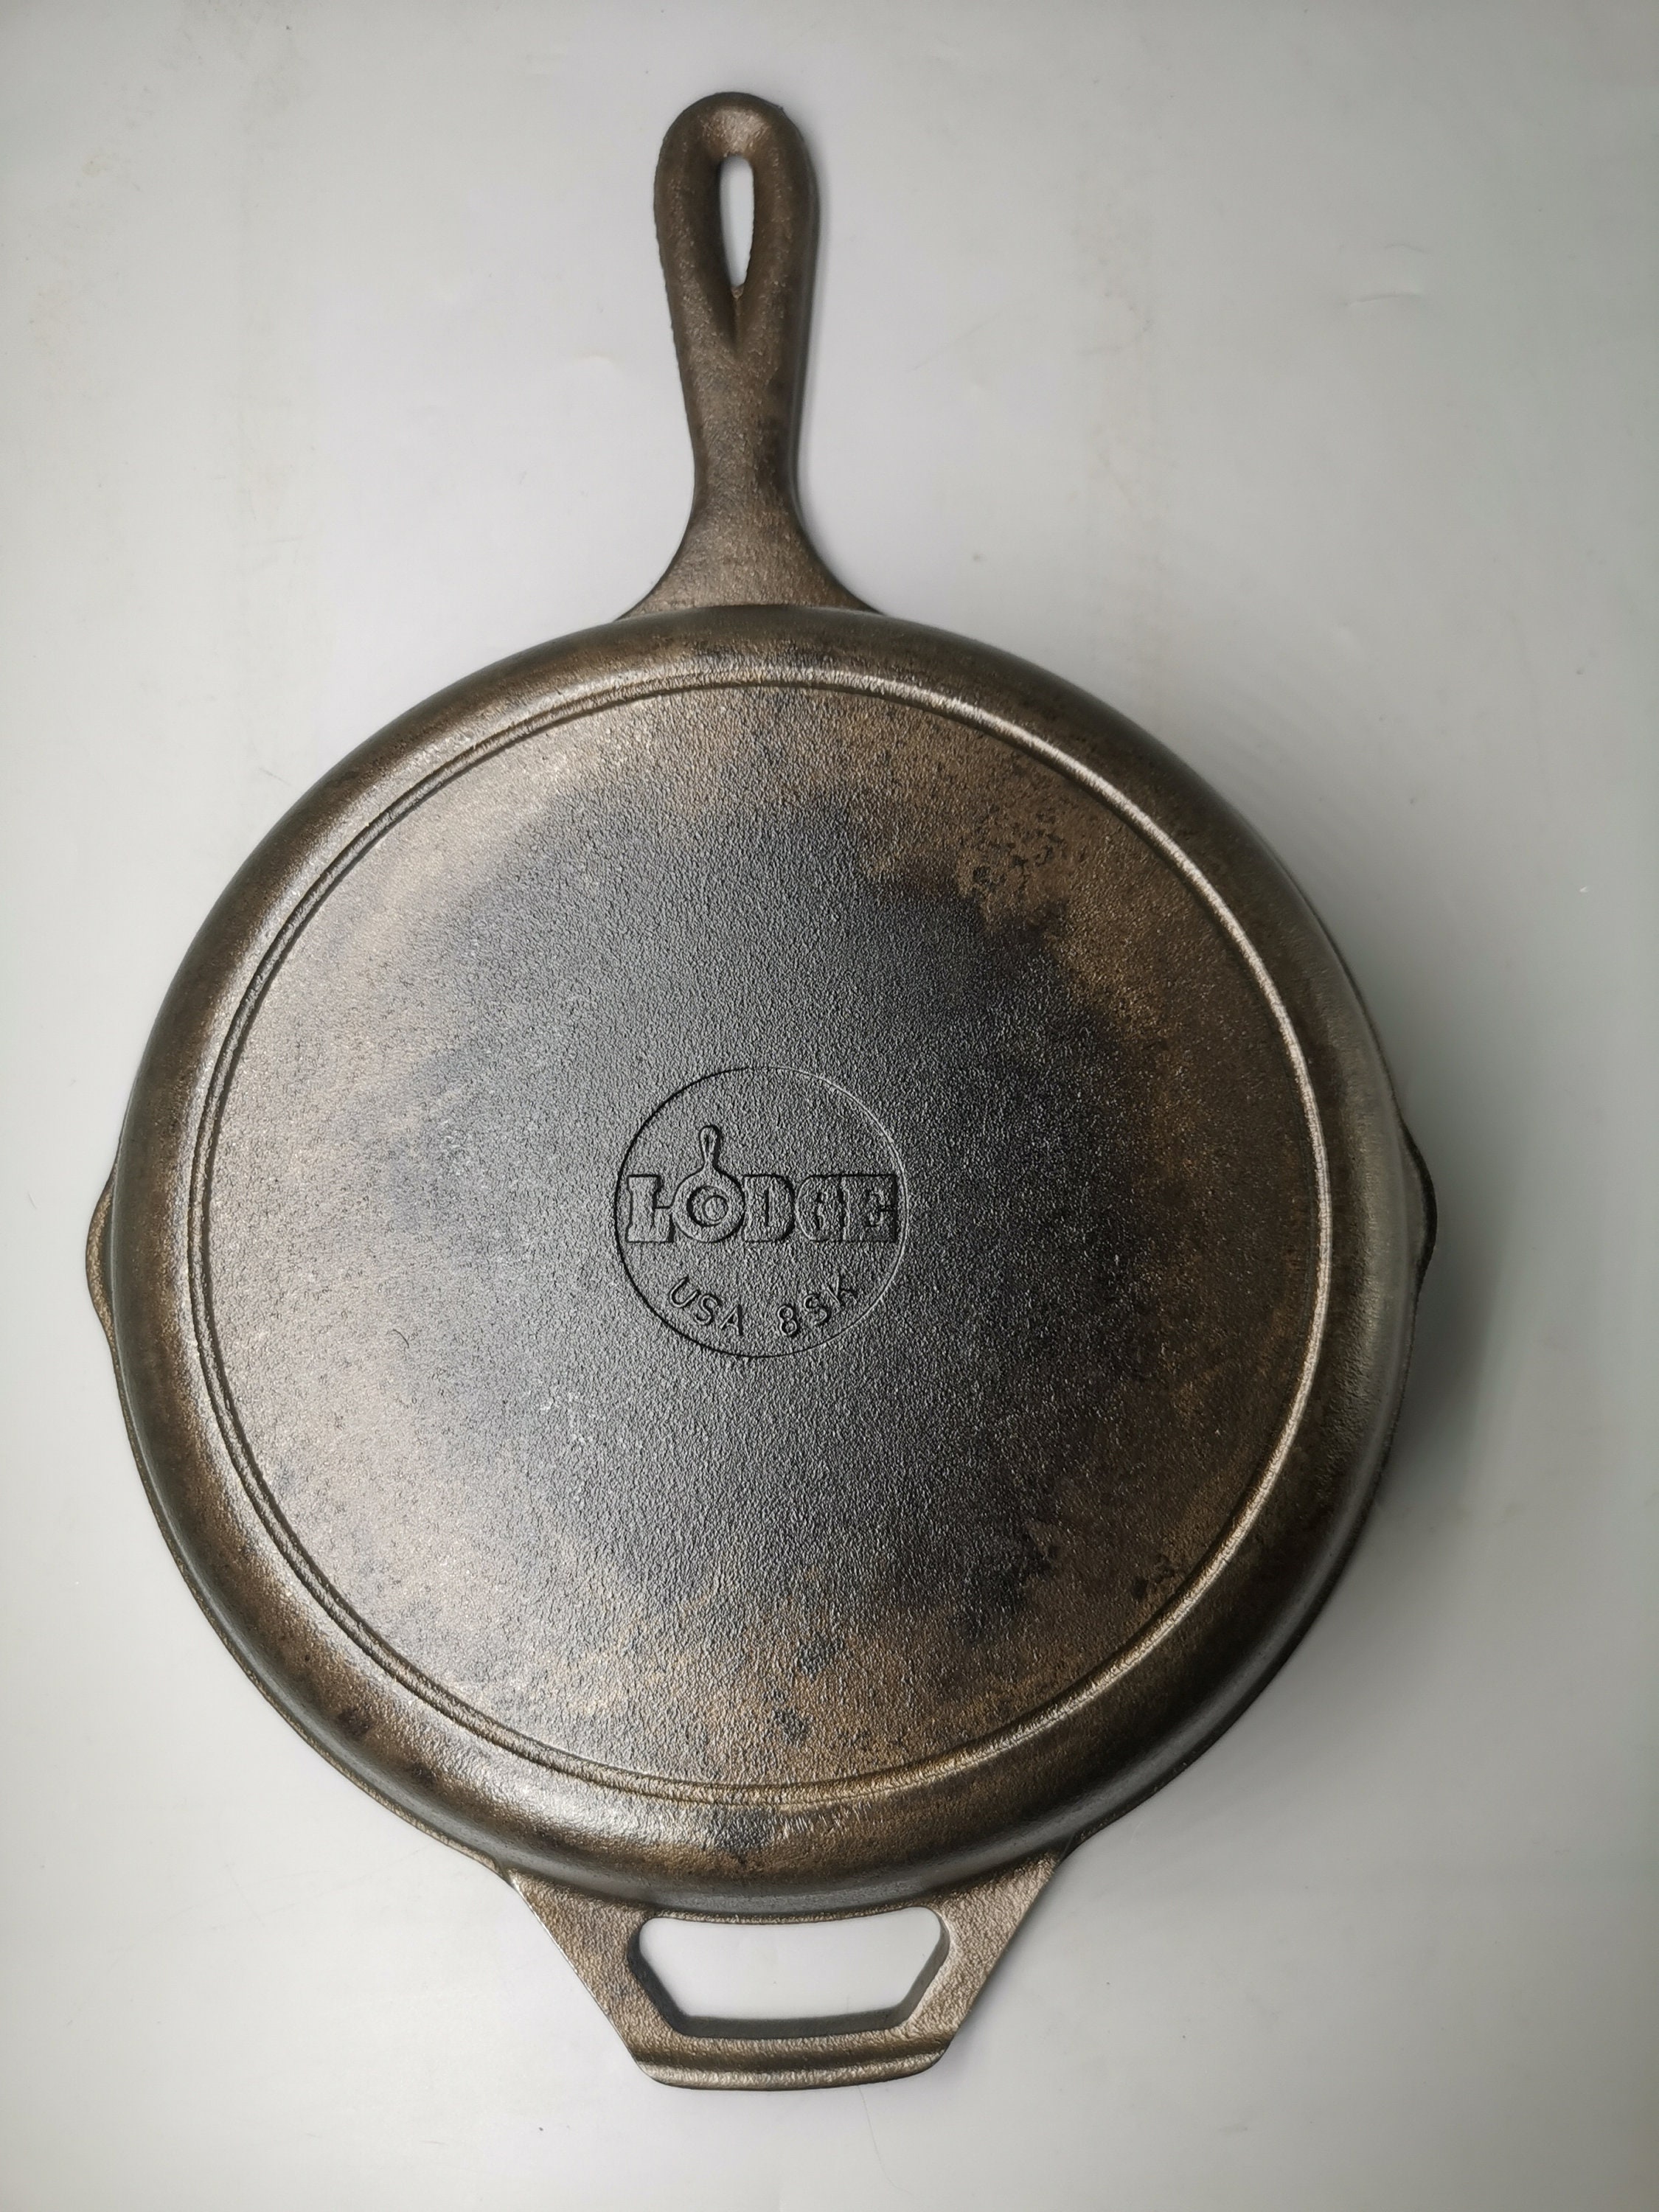 Lodge Pans – The Cook's Edge